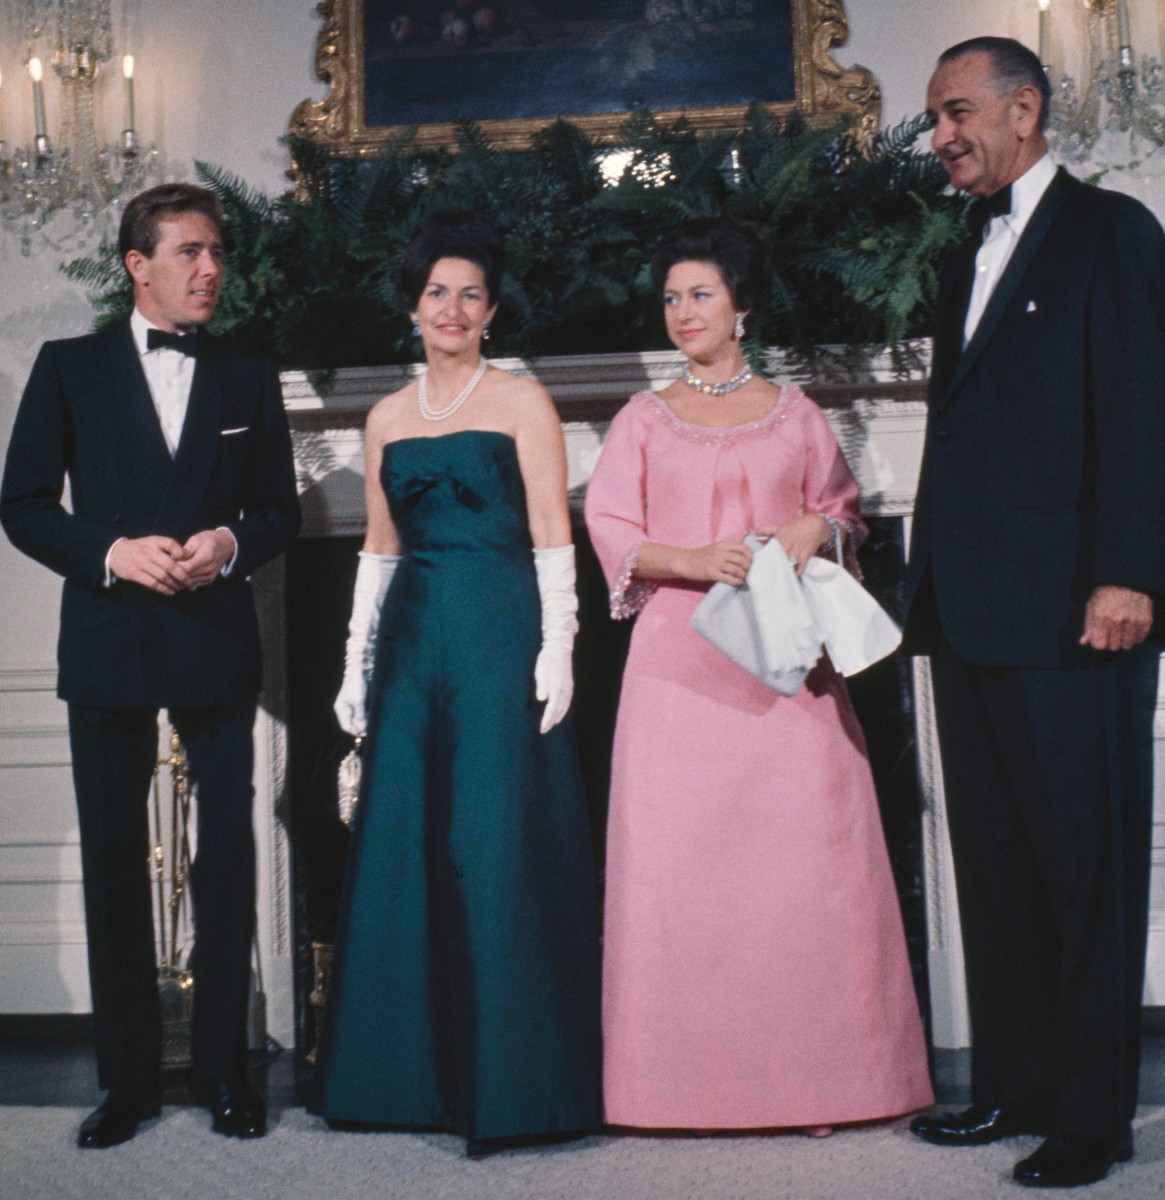 There is no proof that Margaret and husband Lord Snowdon behaved so outrageously when they visited the White House in 1965